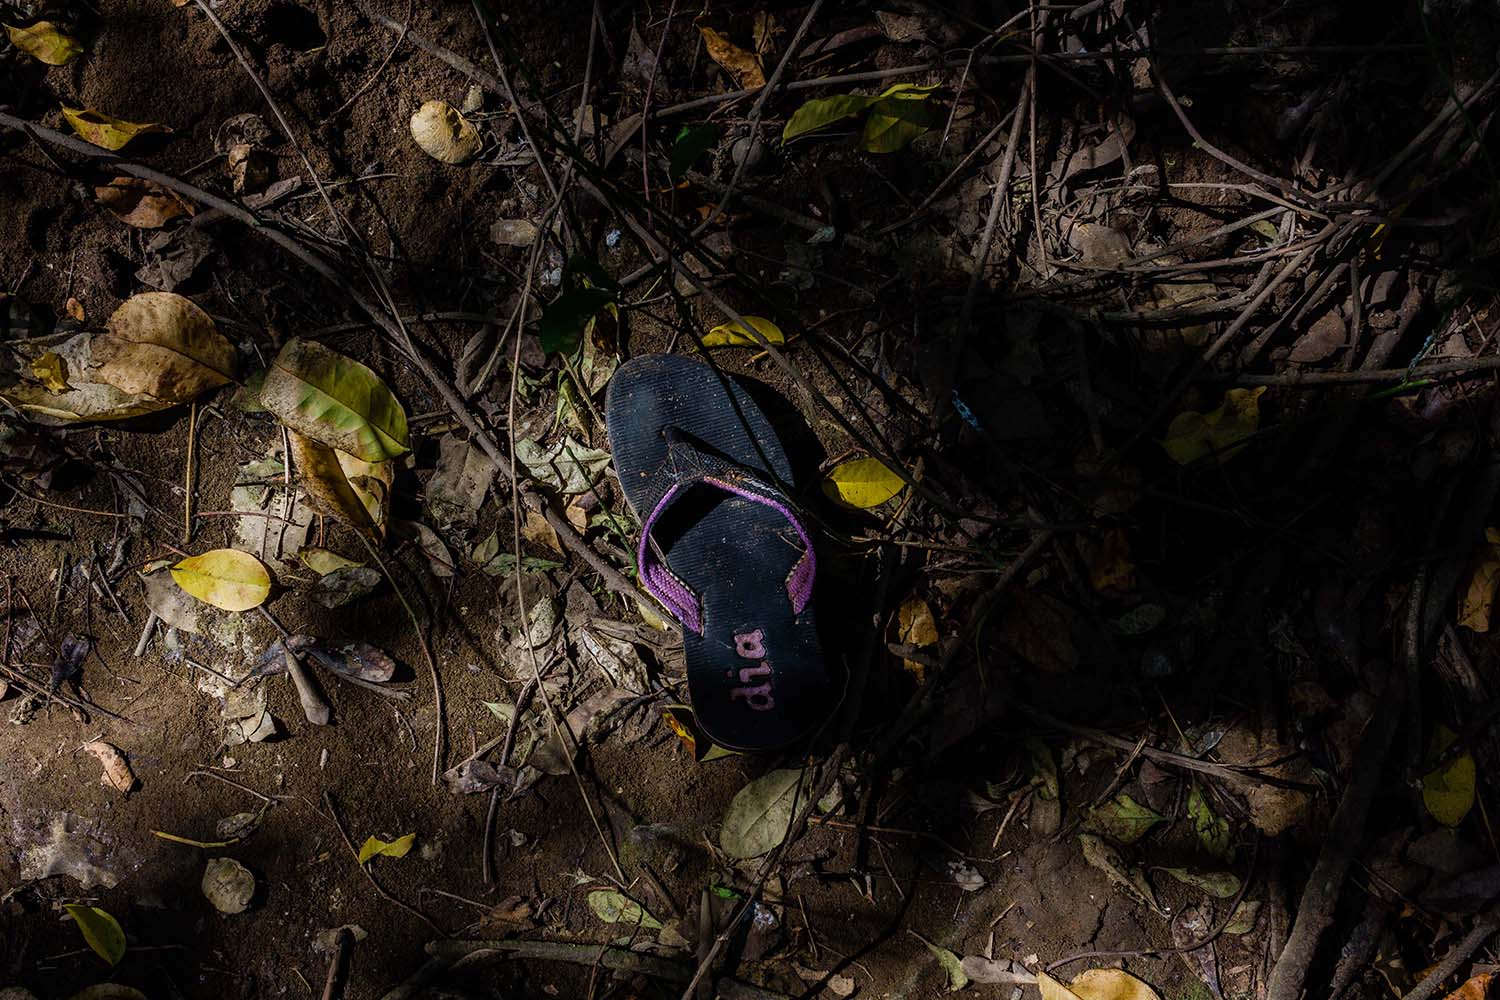 A sandal is among the pieces of domestic waste found in the mangrove area of Baros.JP/Anggertimur Lanang Tinarbuko